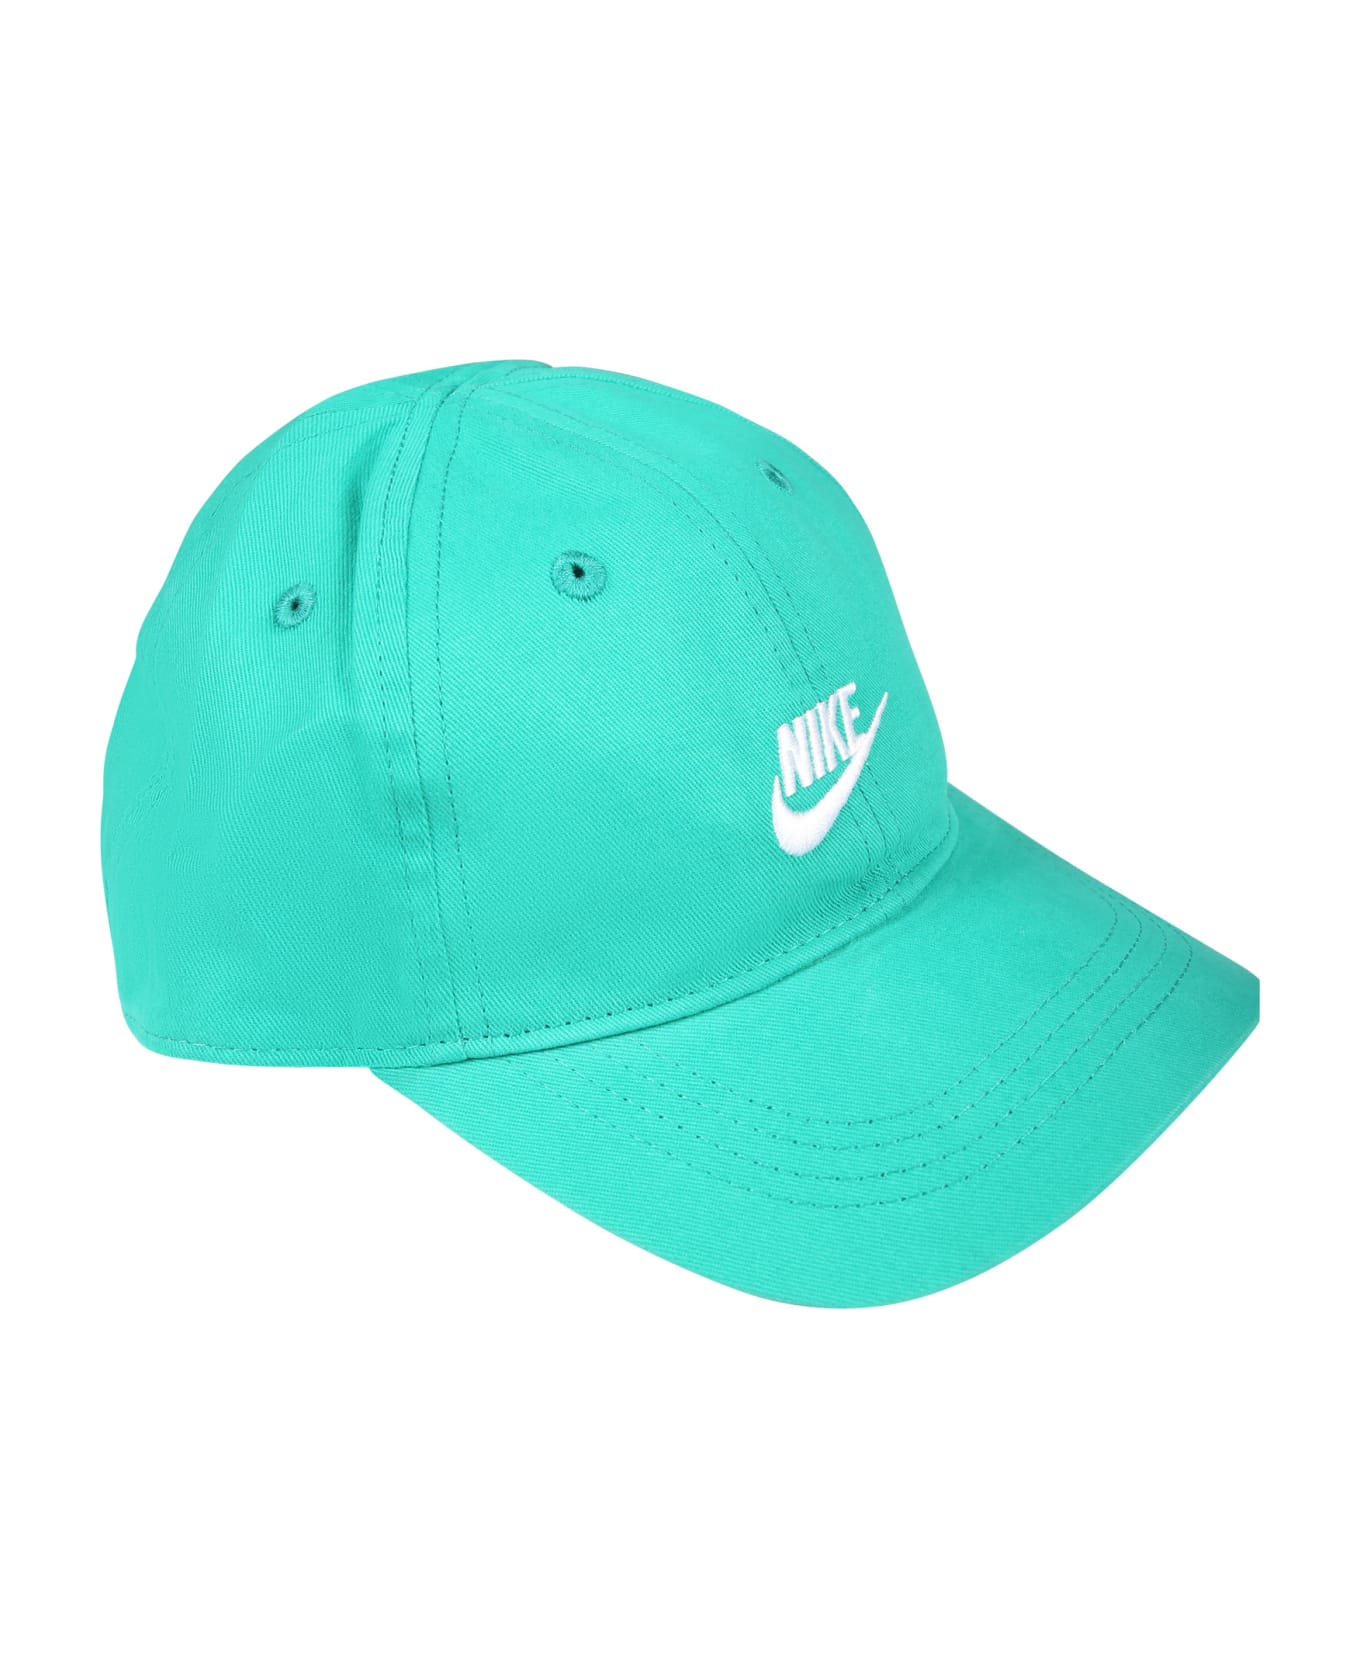 Nike Green Hat With Visor For Kids With The Iconic Swoosh - Green